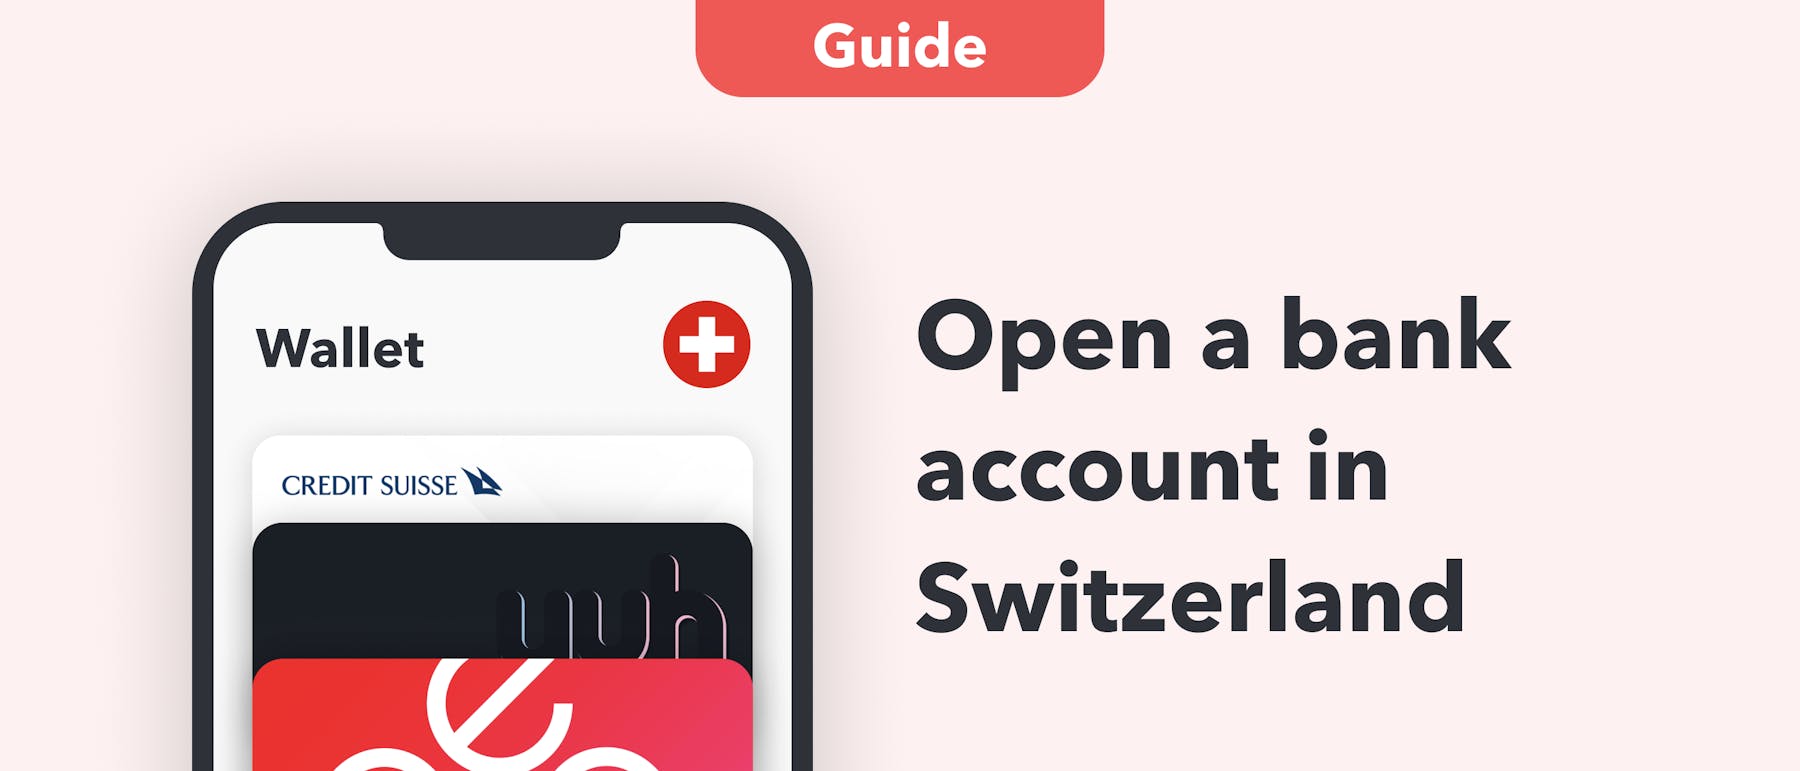 Open a bank account in Switzerland - Tested by Monito